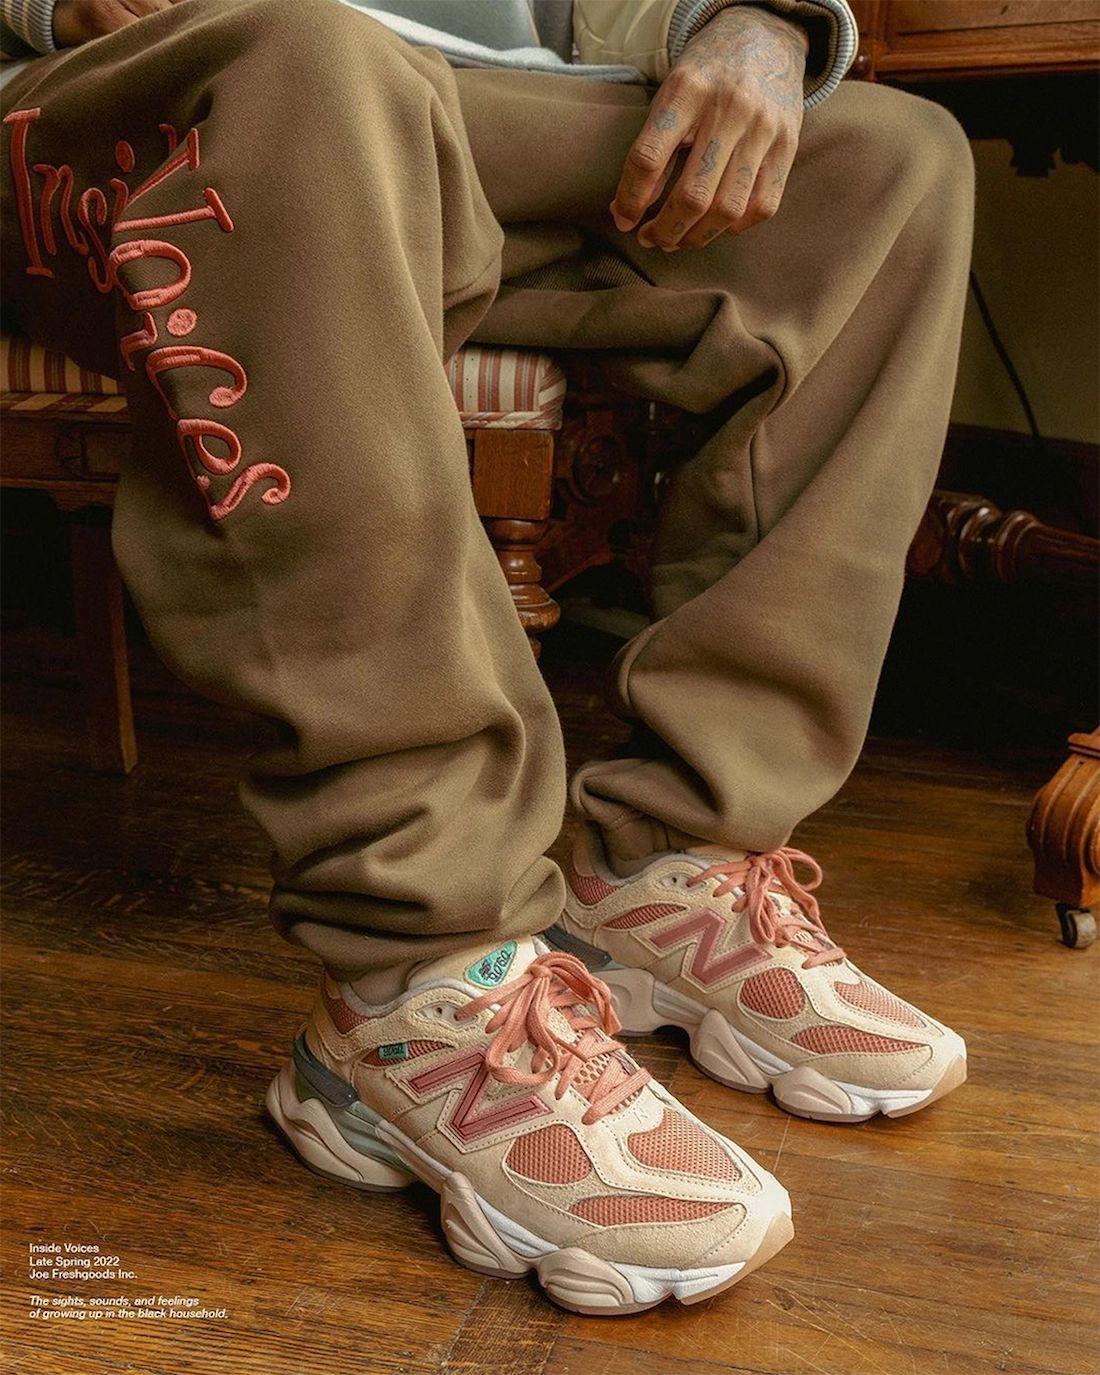 Joe Freshgoods x New Balance Inside Voices Spring 2022 Release Date